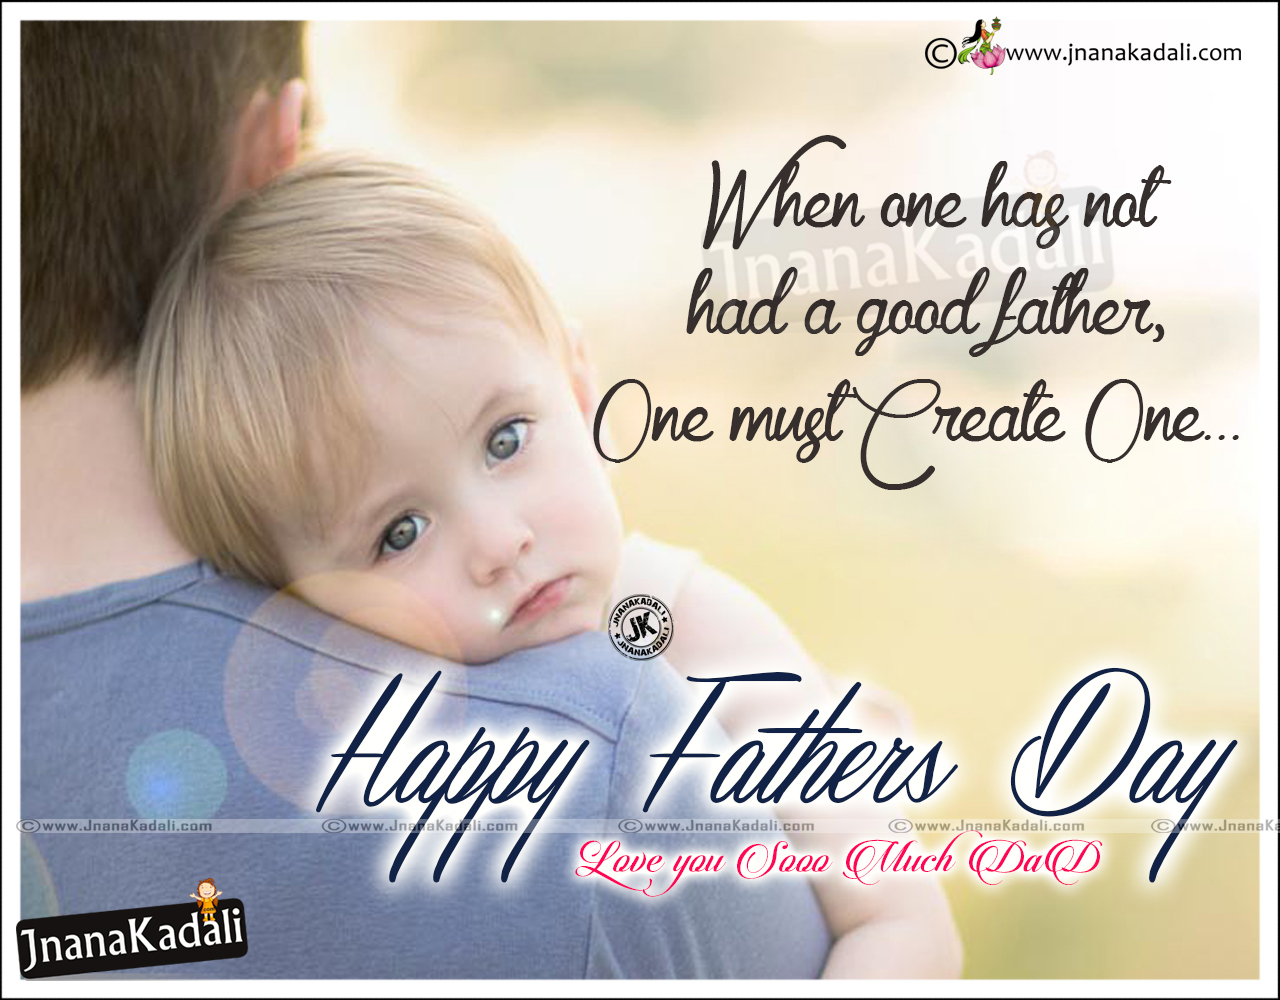 Thank You Dad Quotations on Fathers Day. JNANA KADALI.COM. Telugu Quotes. English quotes. Hindi quotes. Tamil quotes. Dharmasandehalu